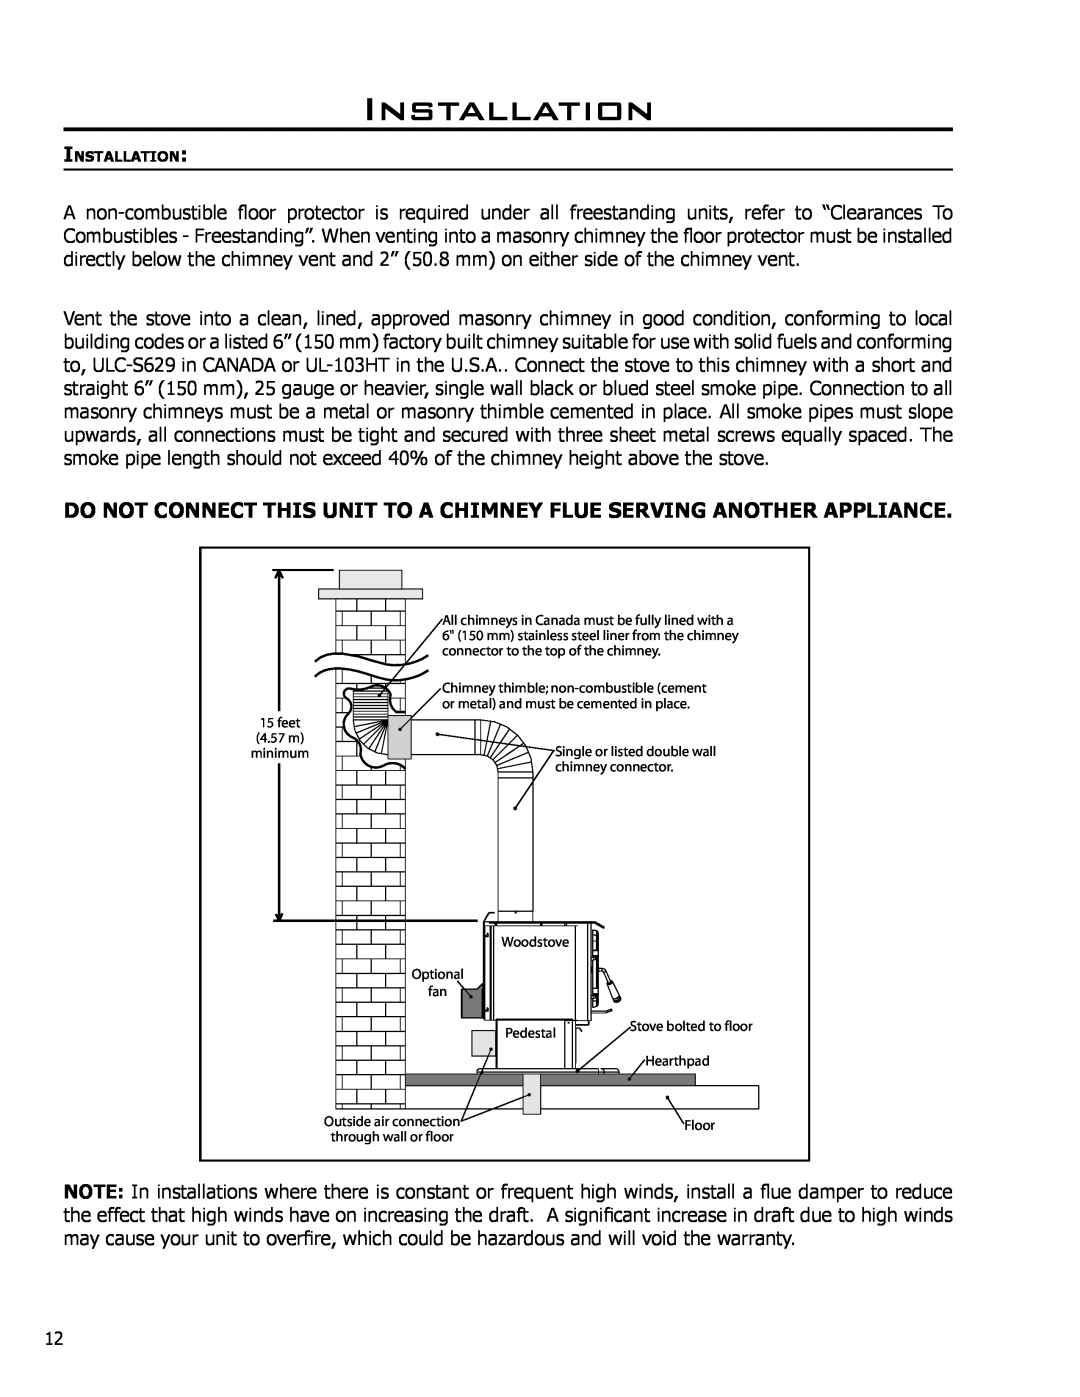 Enviro 2100 owner manual Installation, Do Not Connect This Unit To A Chimney Flue Serving Another Appliance 